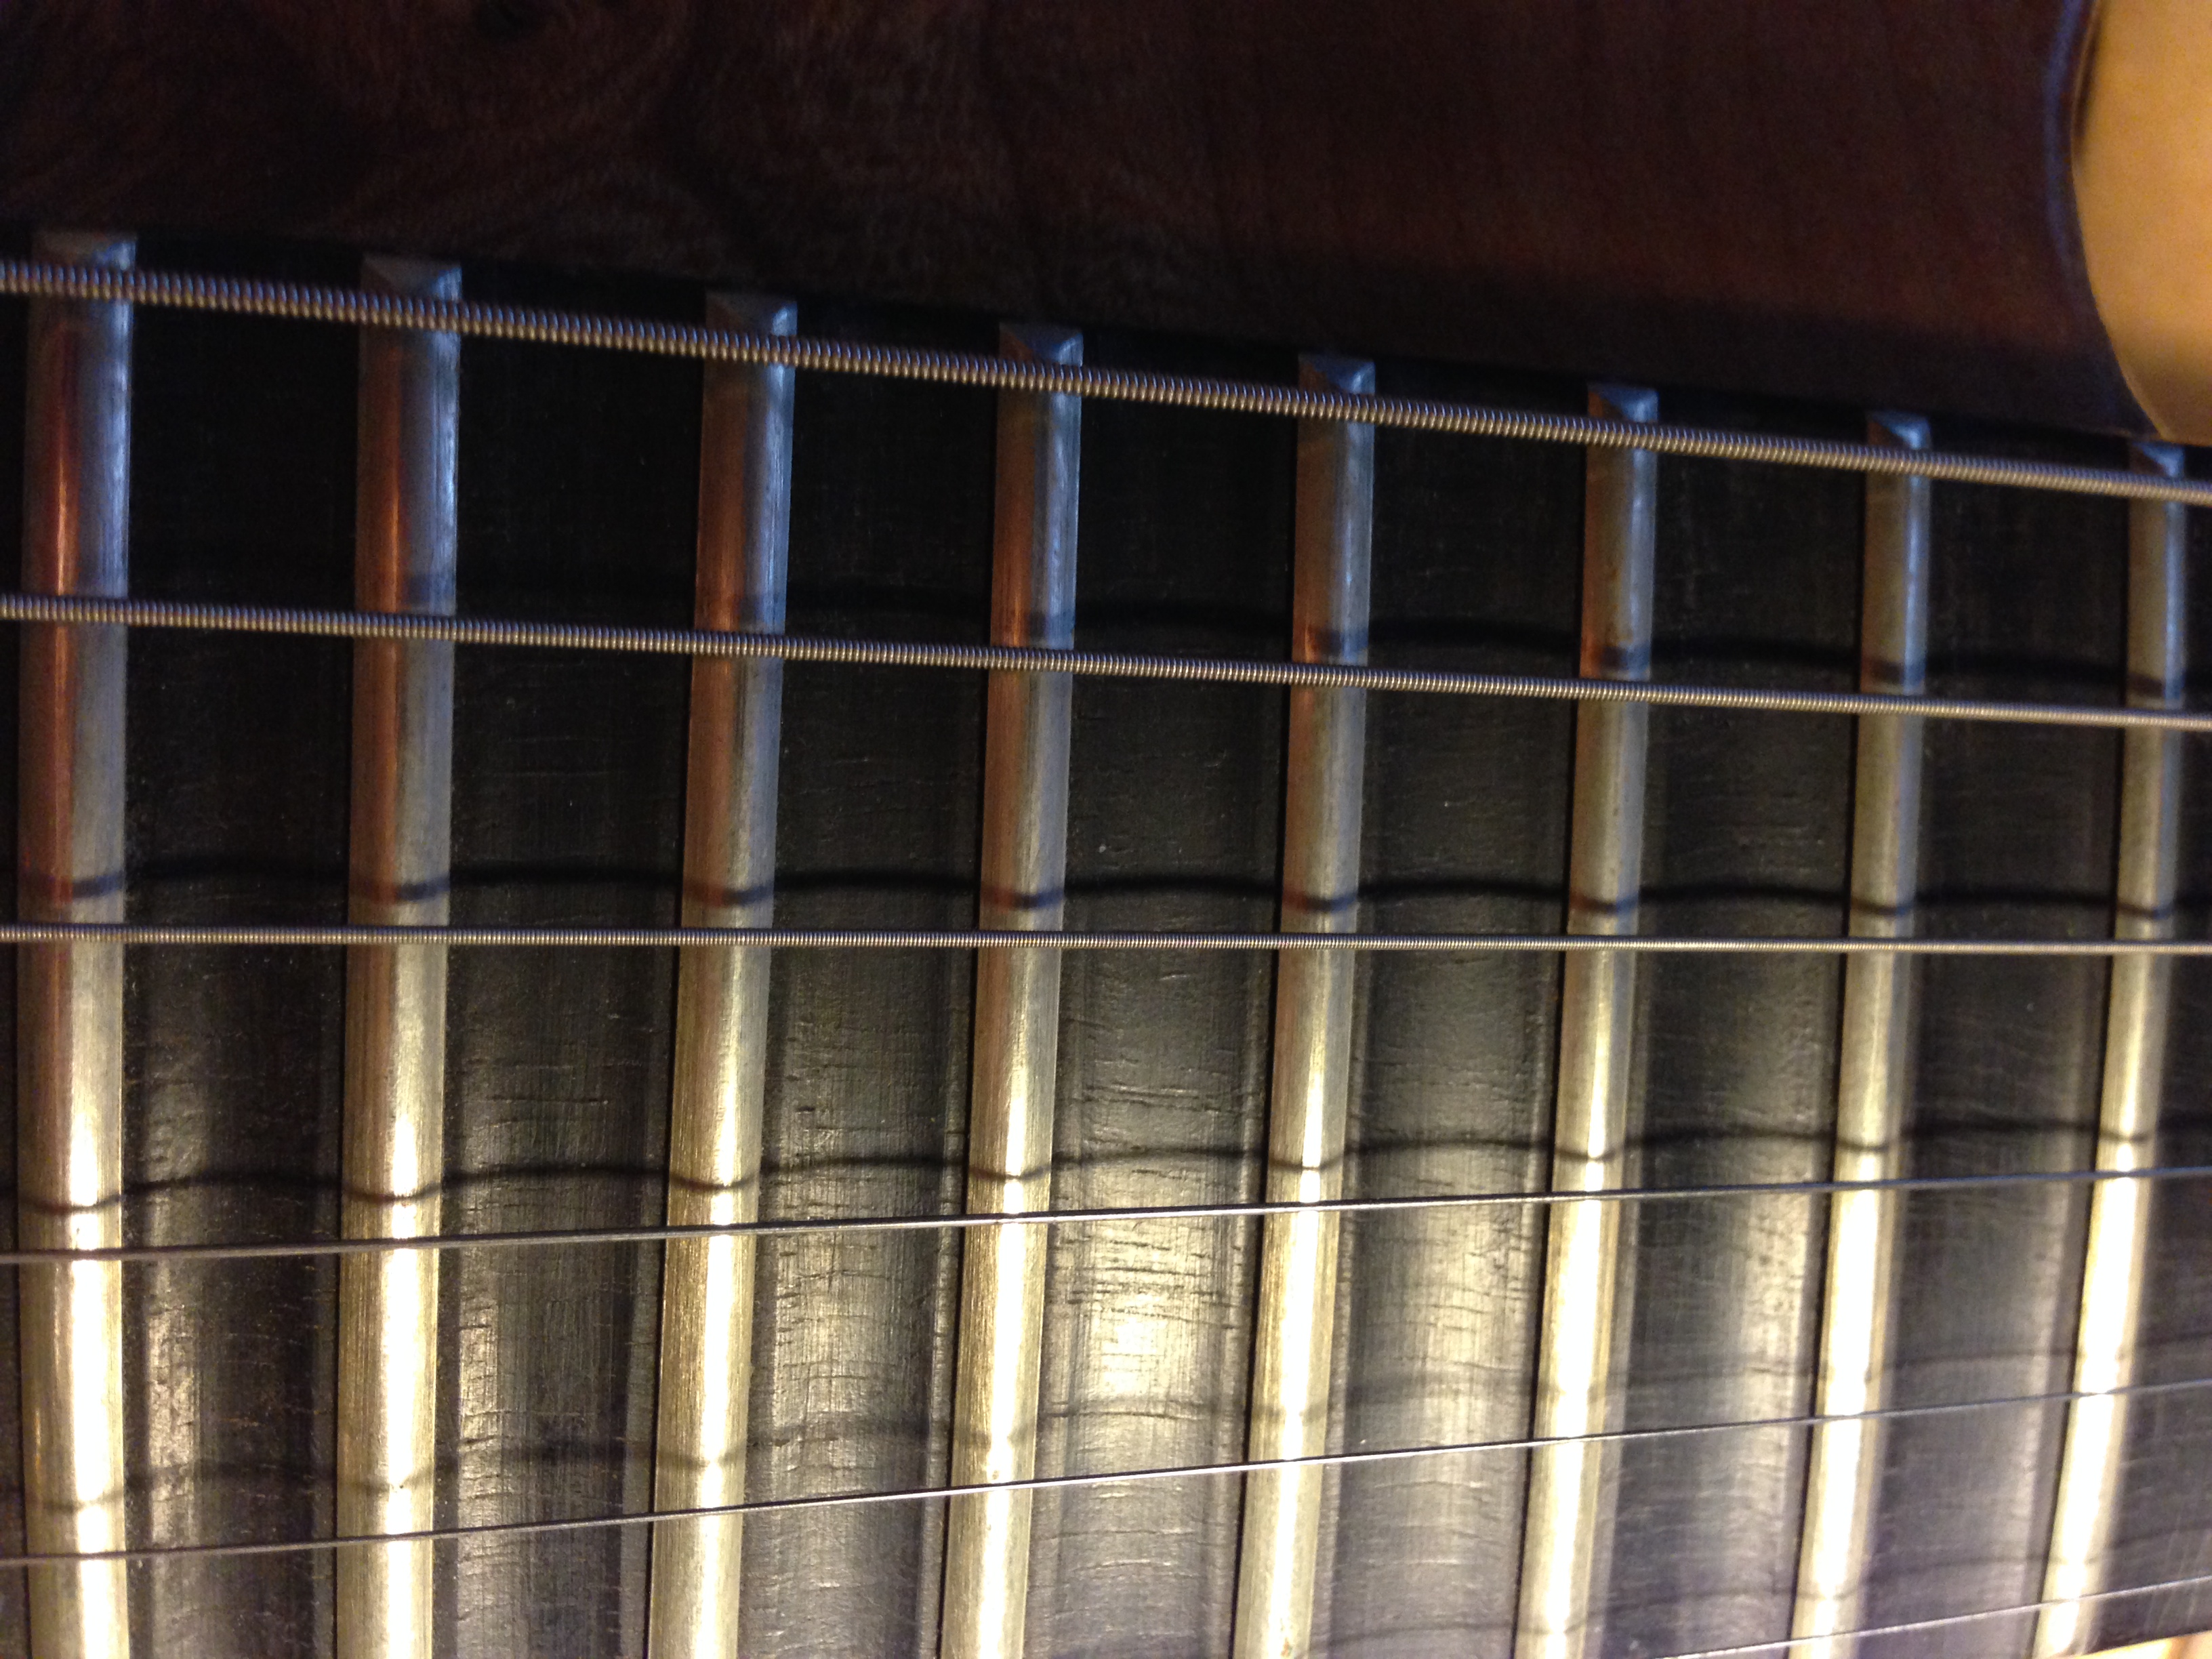 Scalloped ebony fingerboard, gradual increase from the octave to the 24th fret.